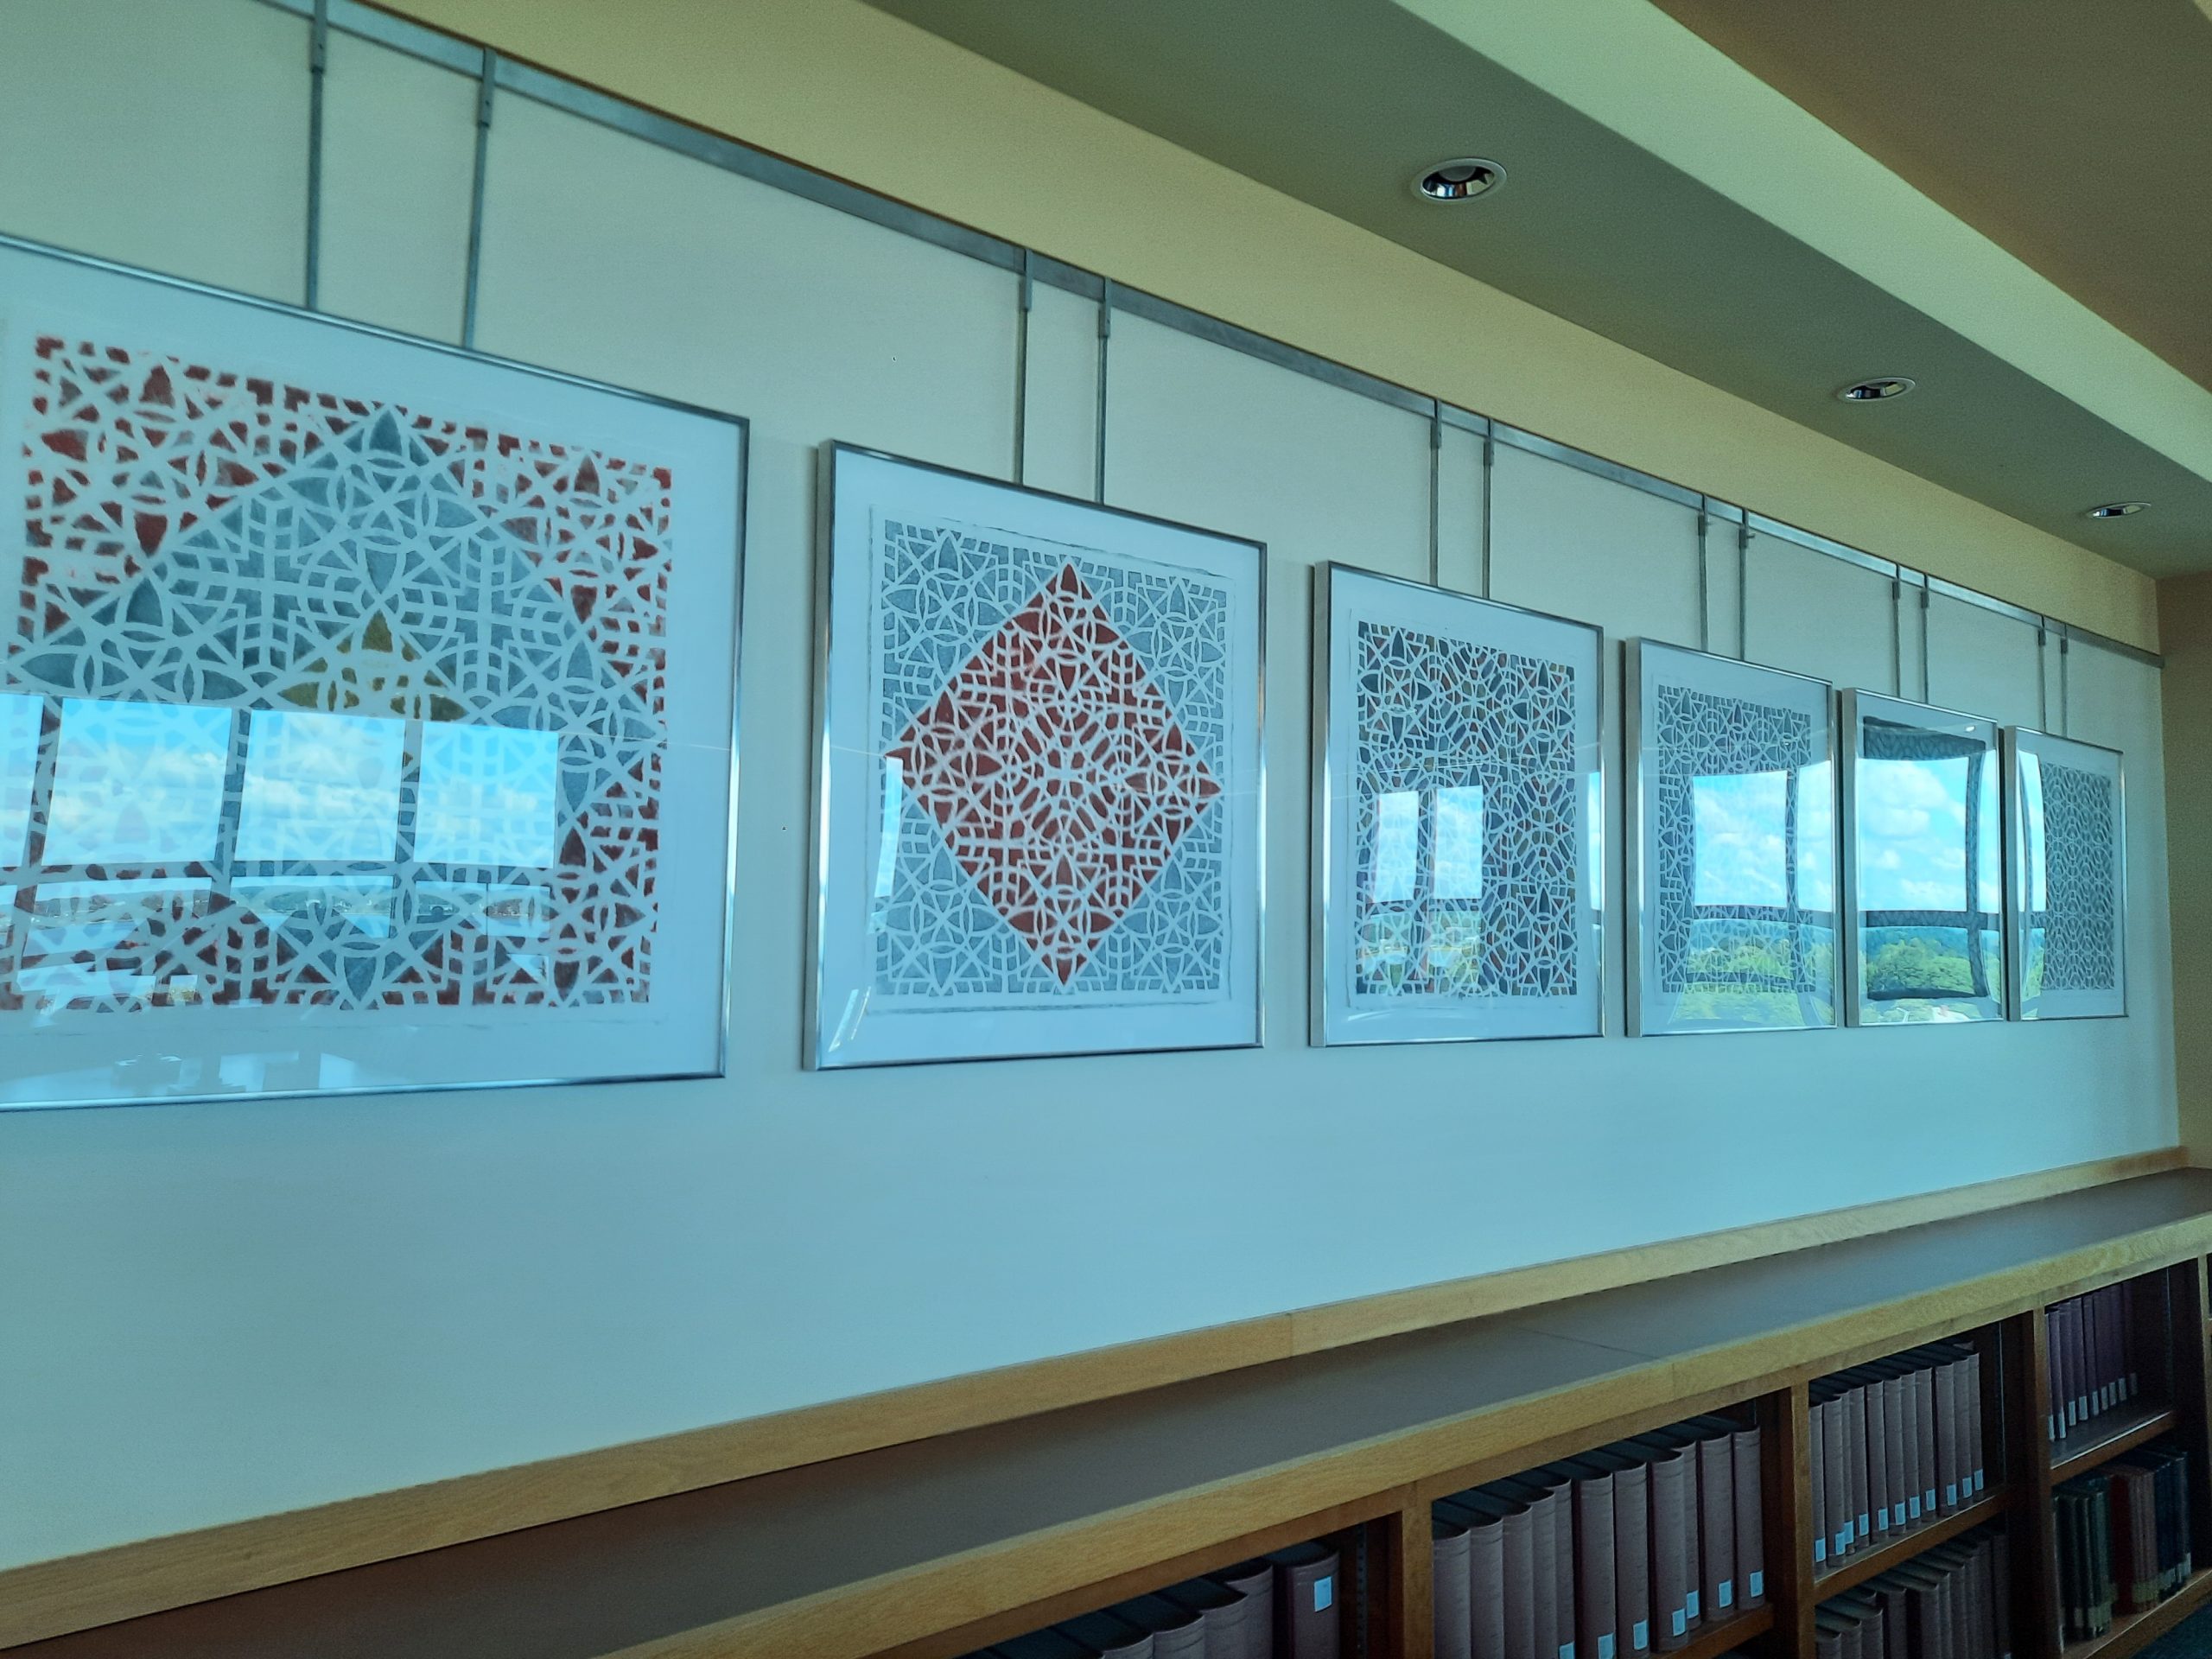 "Spray" series by artist Reni Gower, 2014. Part of "Pulped Under Pressure," 2022. Installation view, Glickman Family Library.